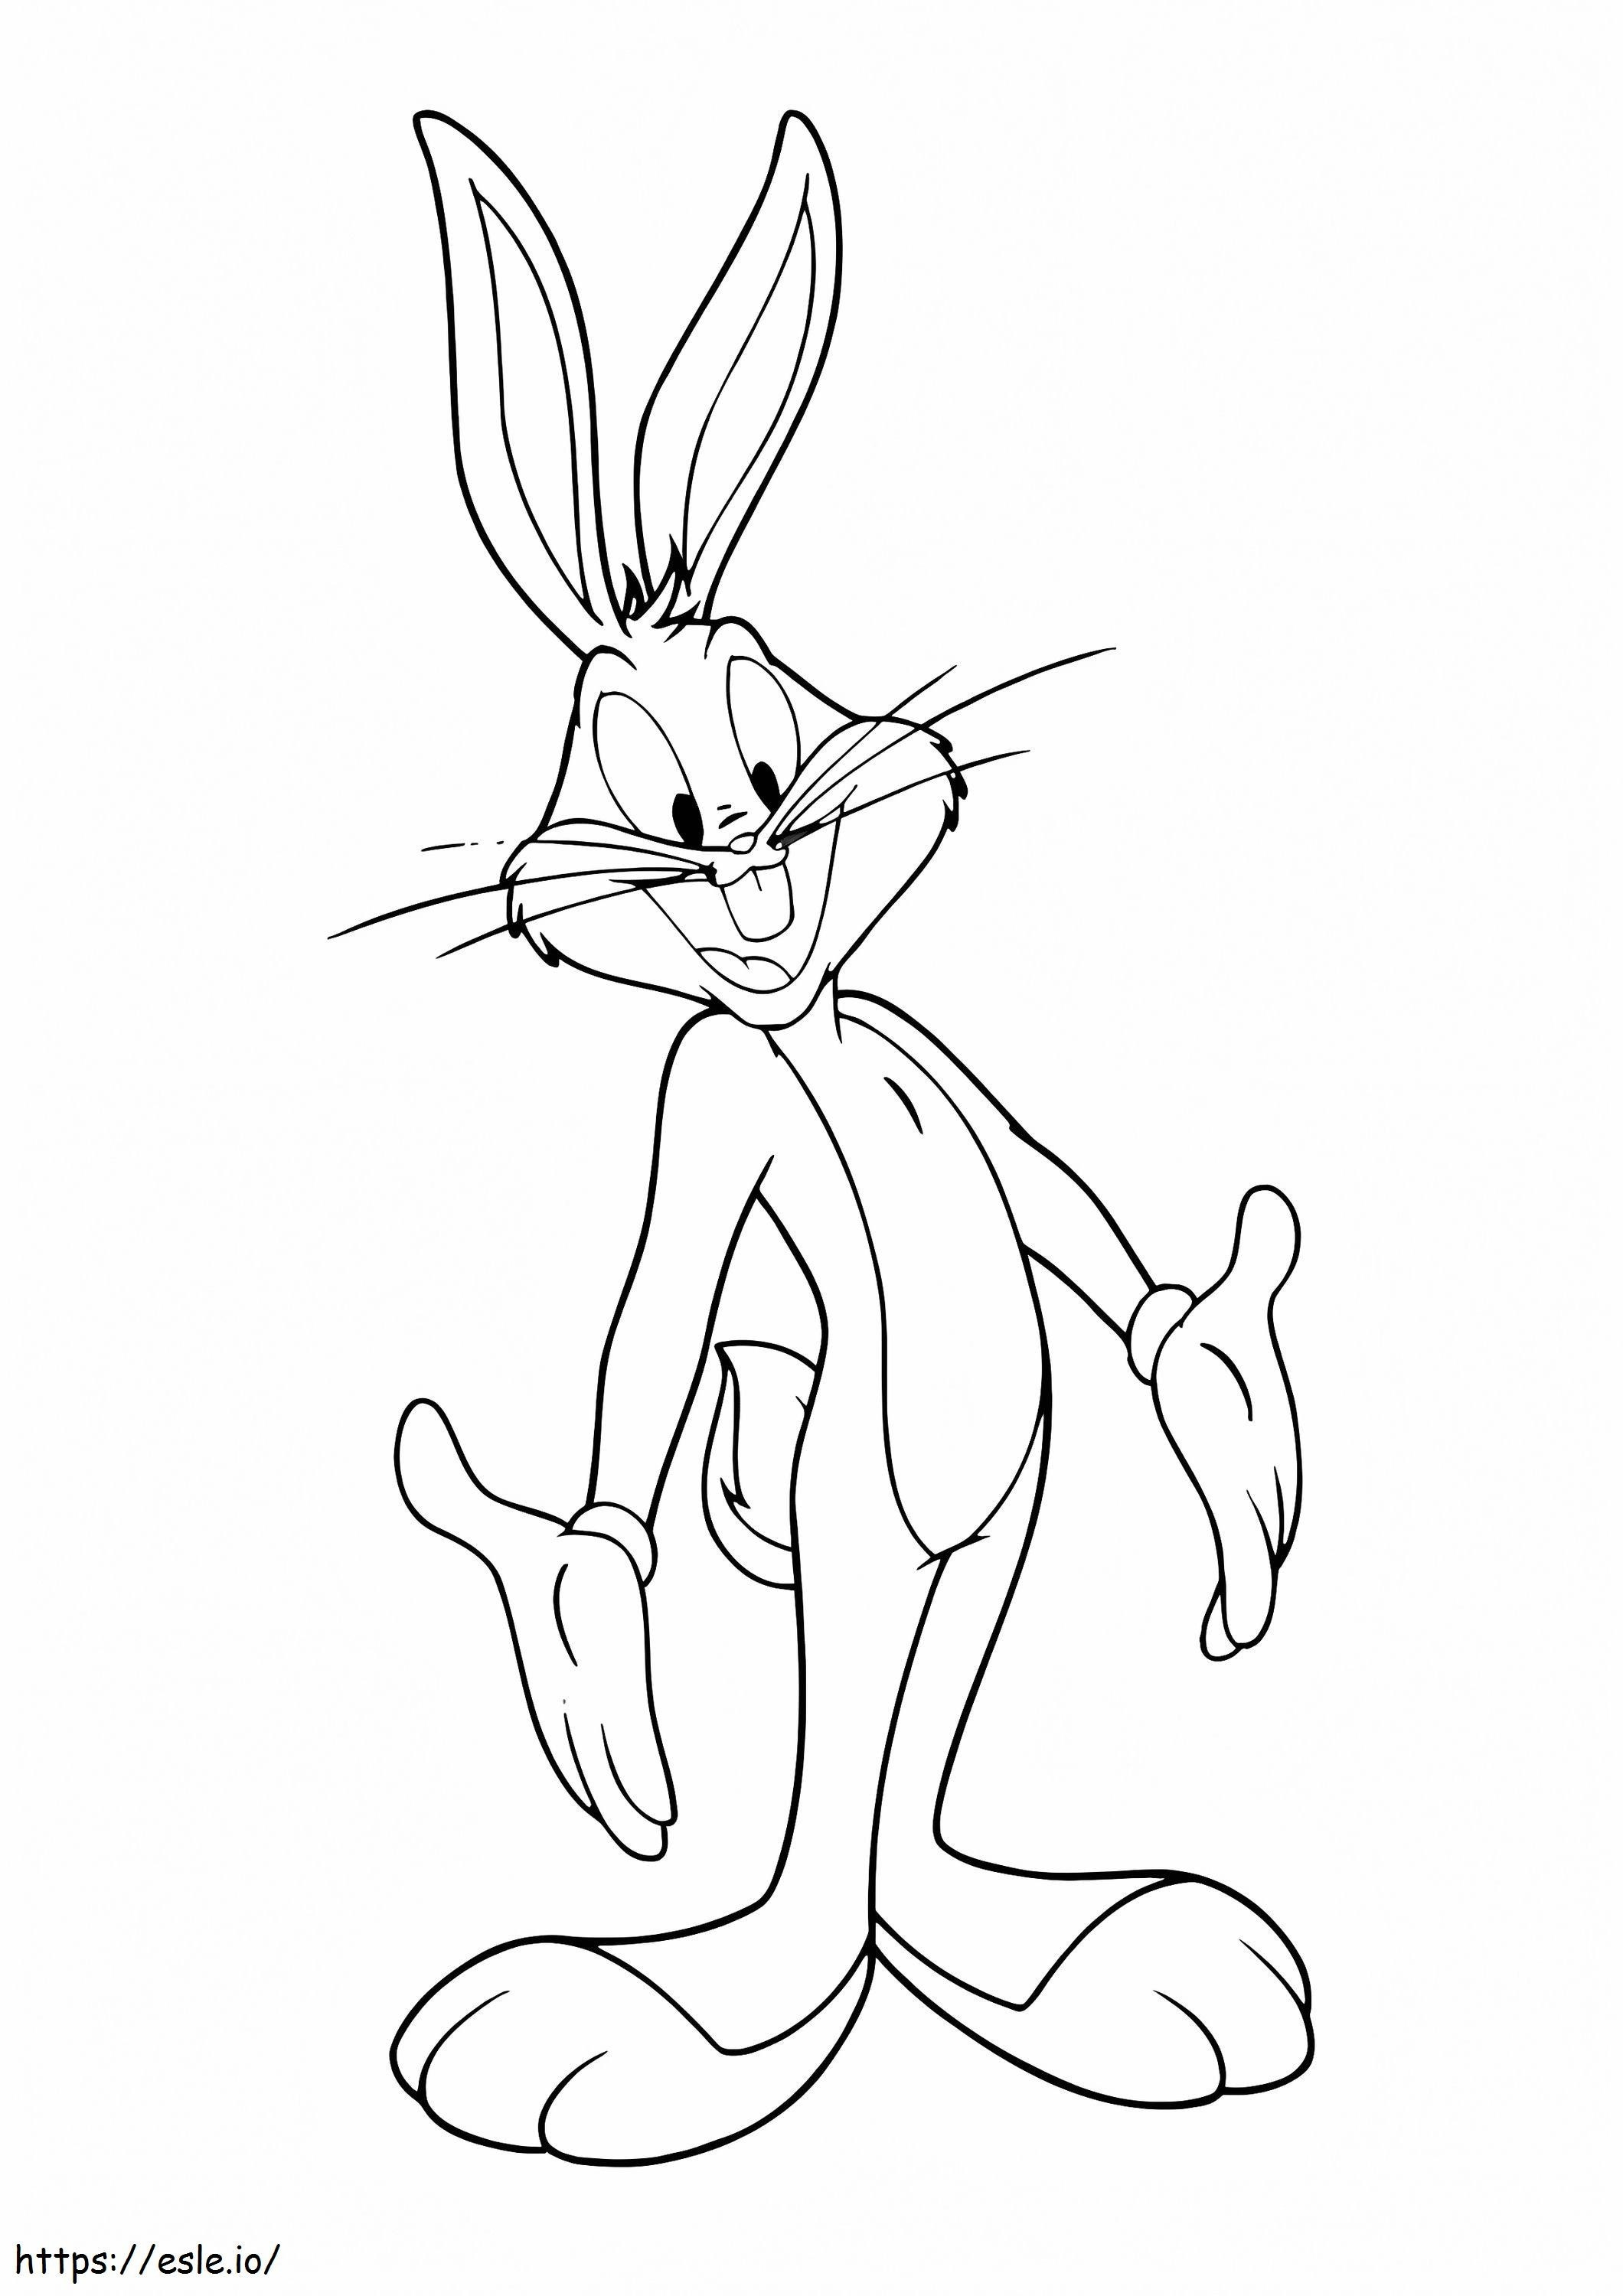 1526562269 Smiling Bugs Bunny A4 coloring page